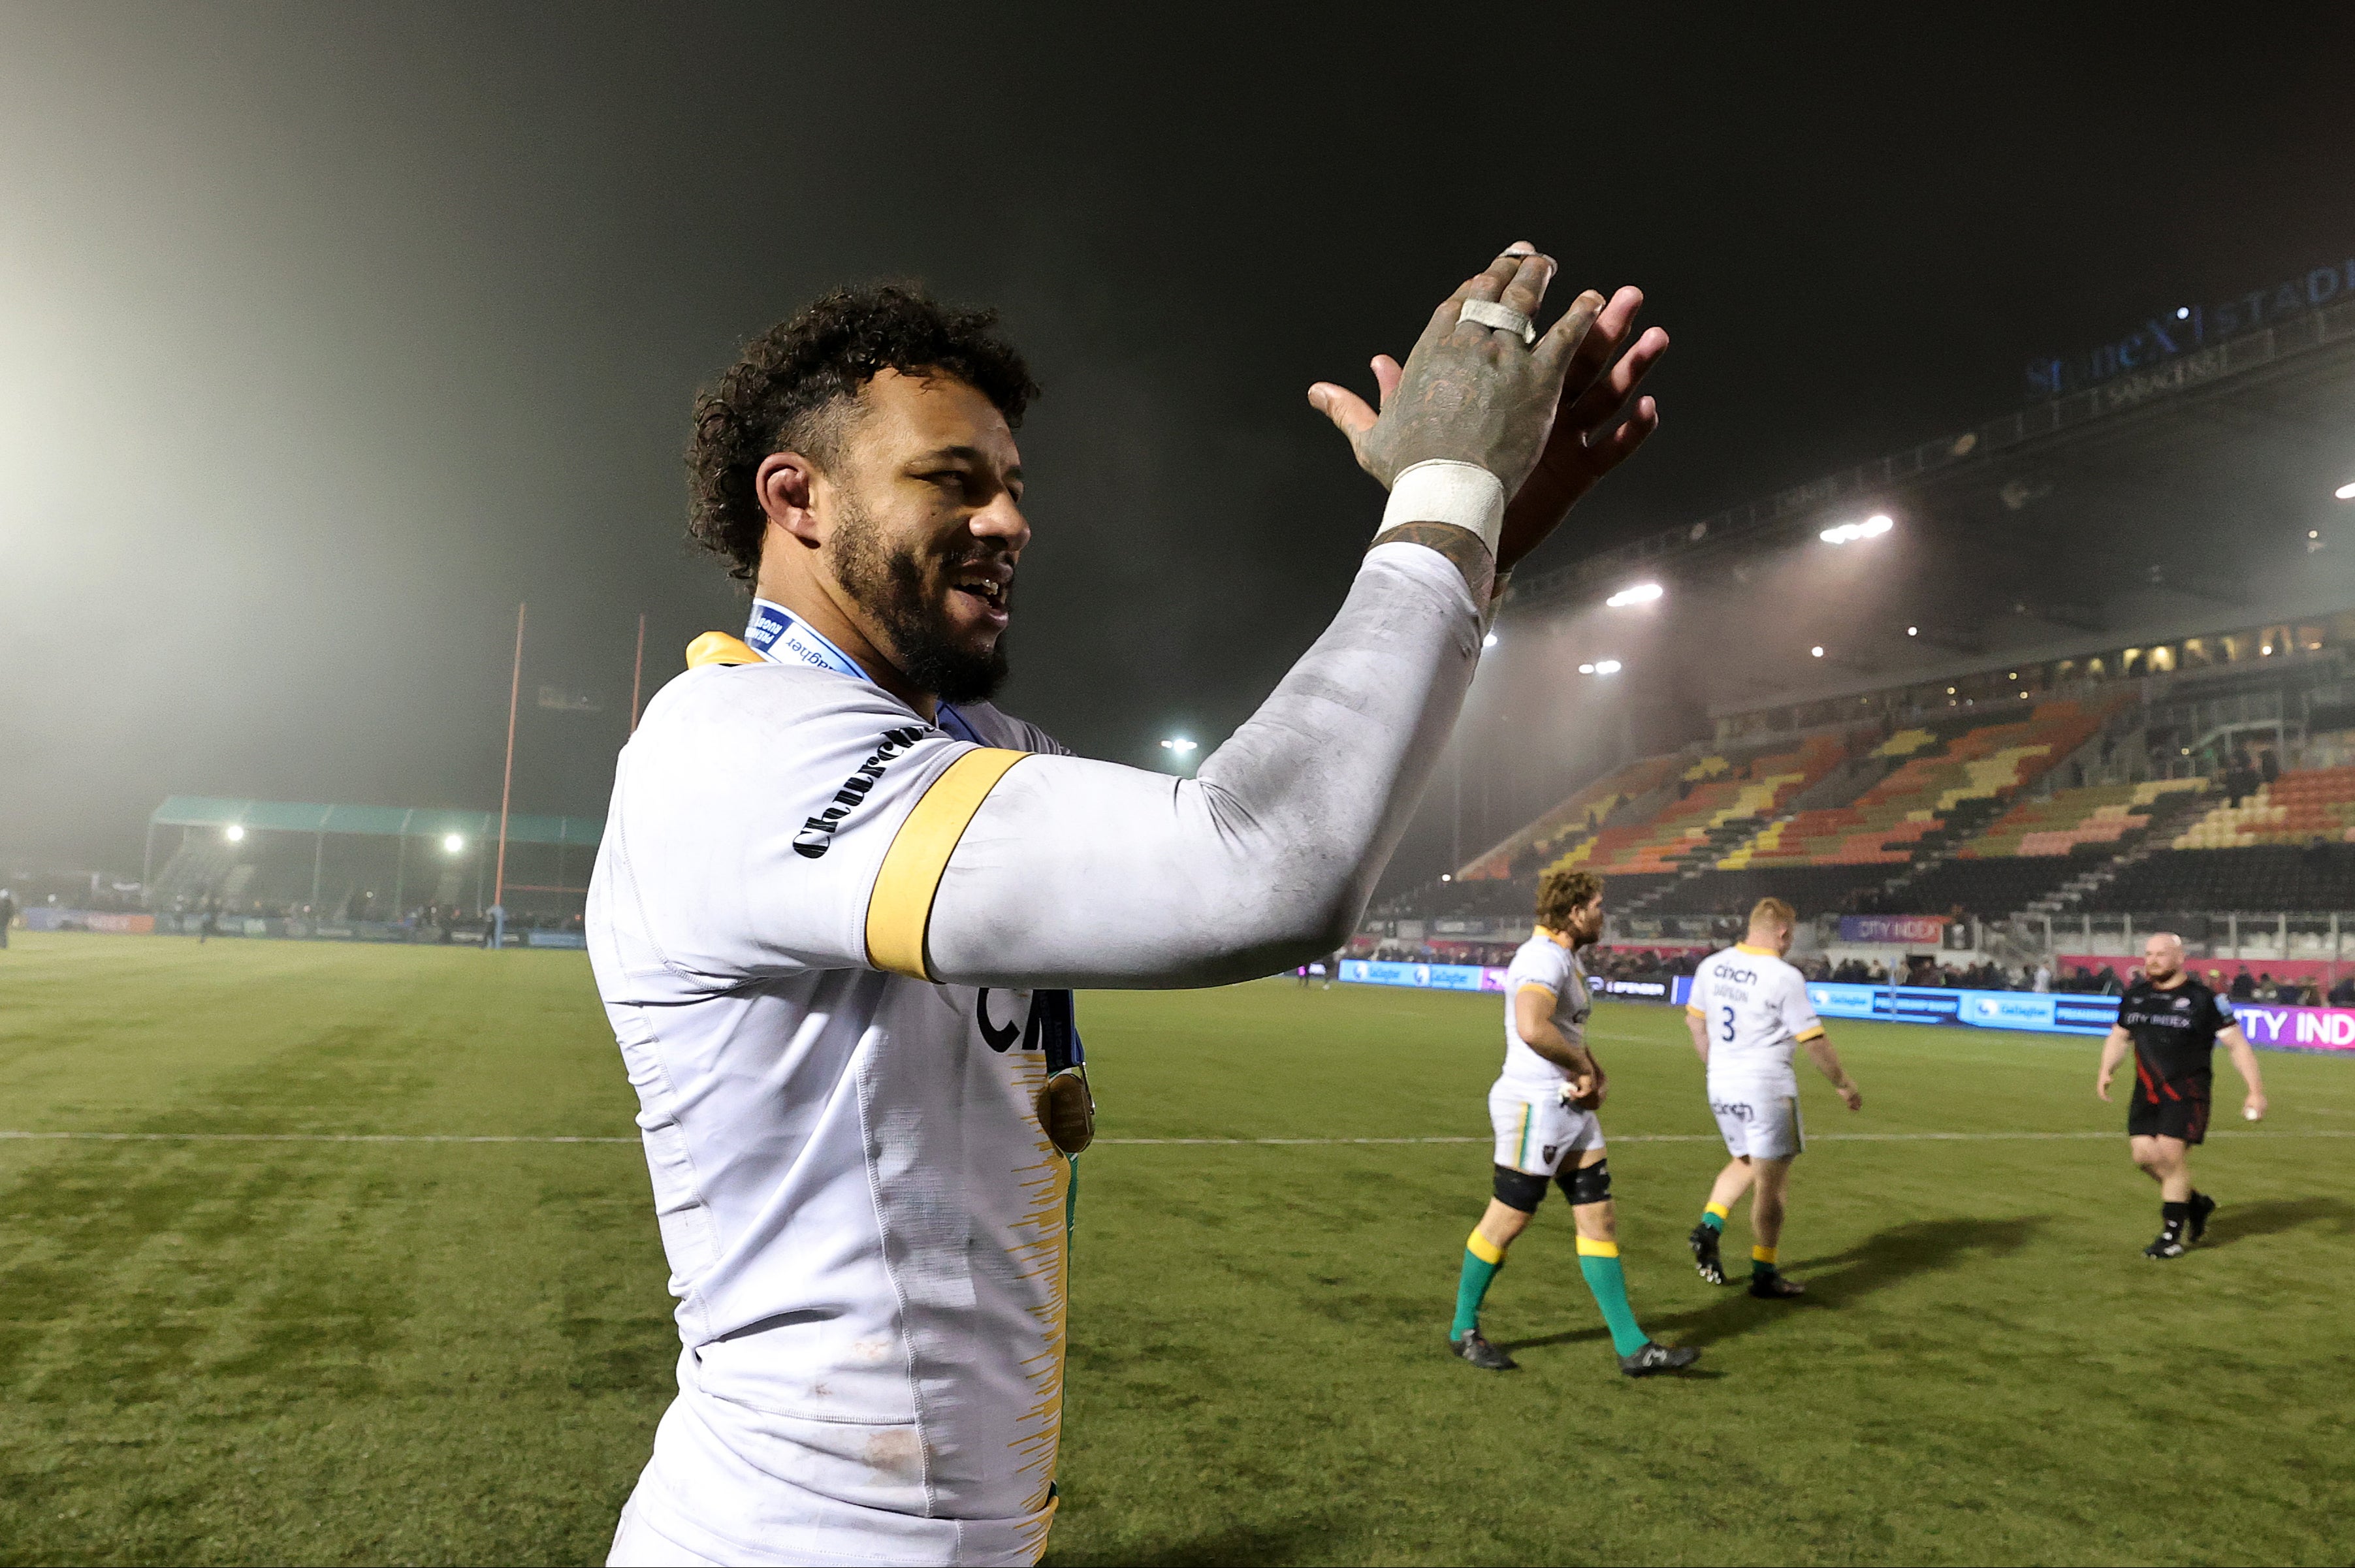 Courtney Lawes will leave Northampton at the end of the season